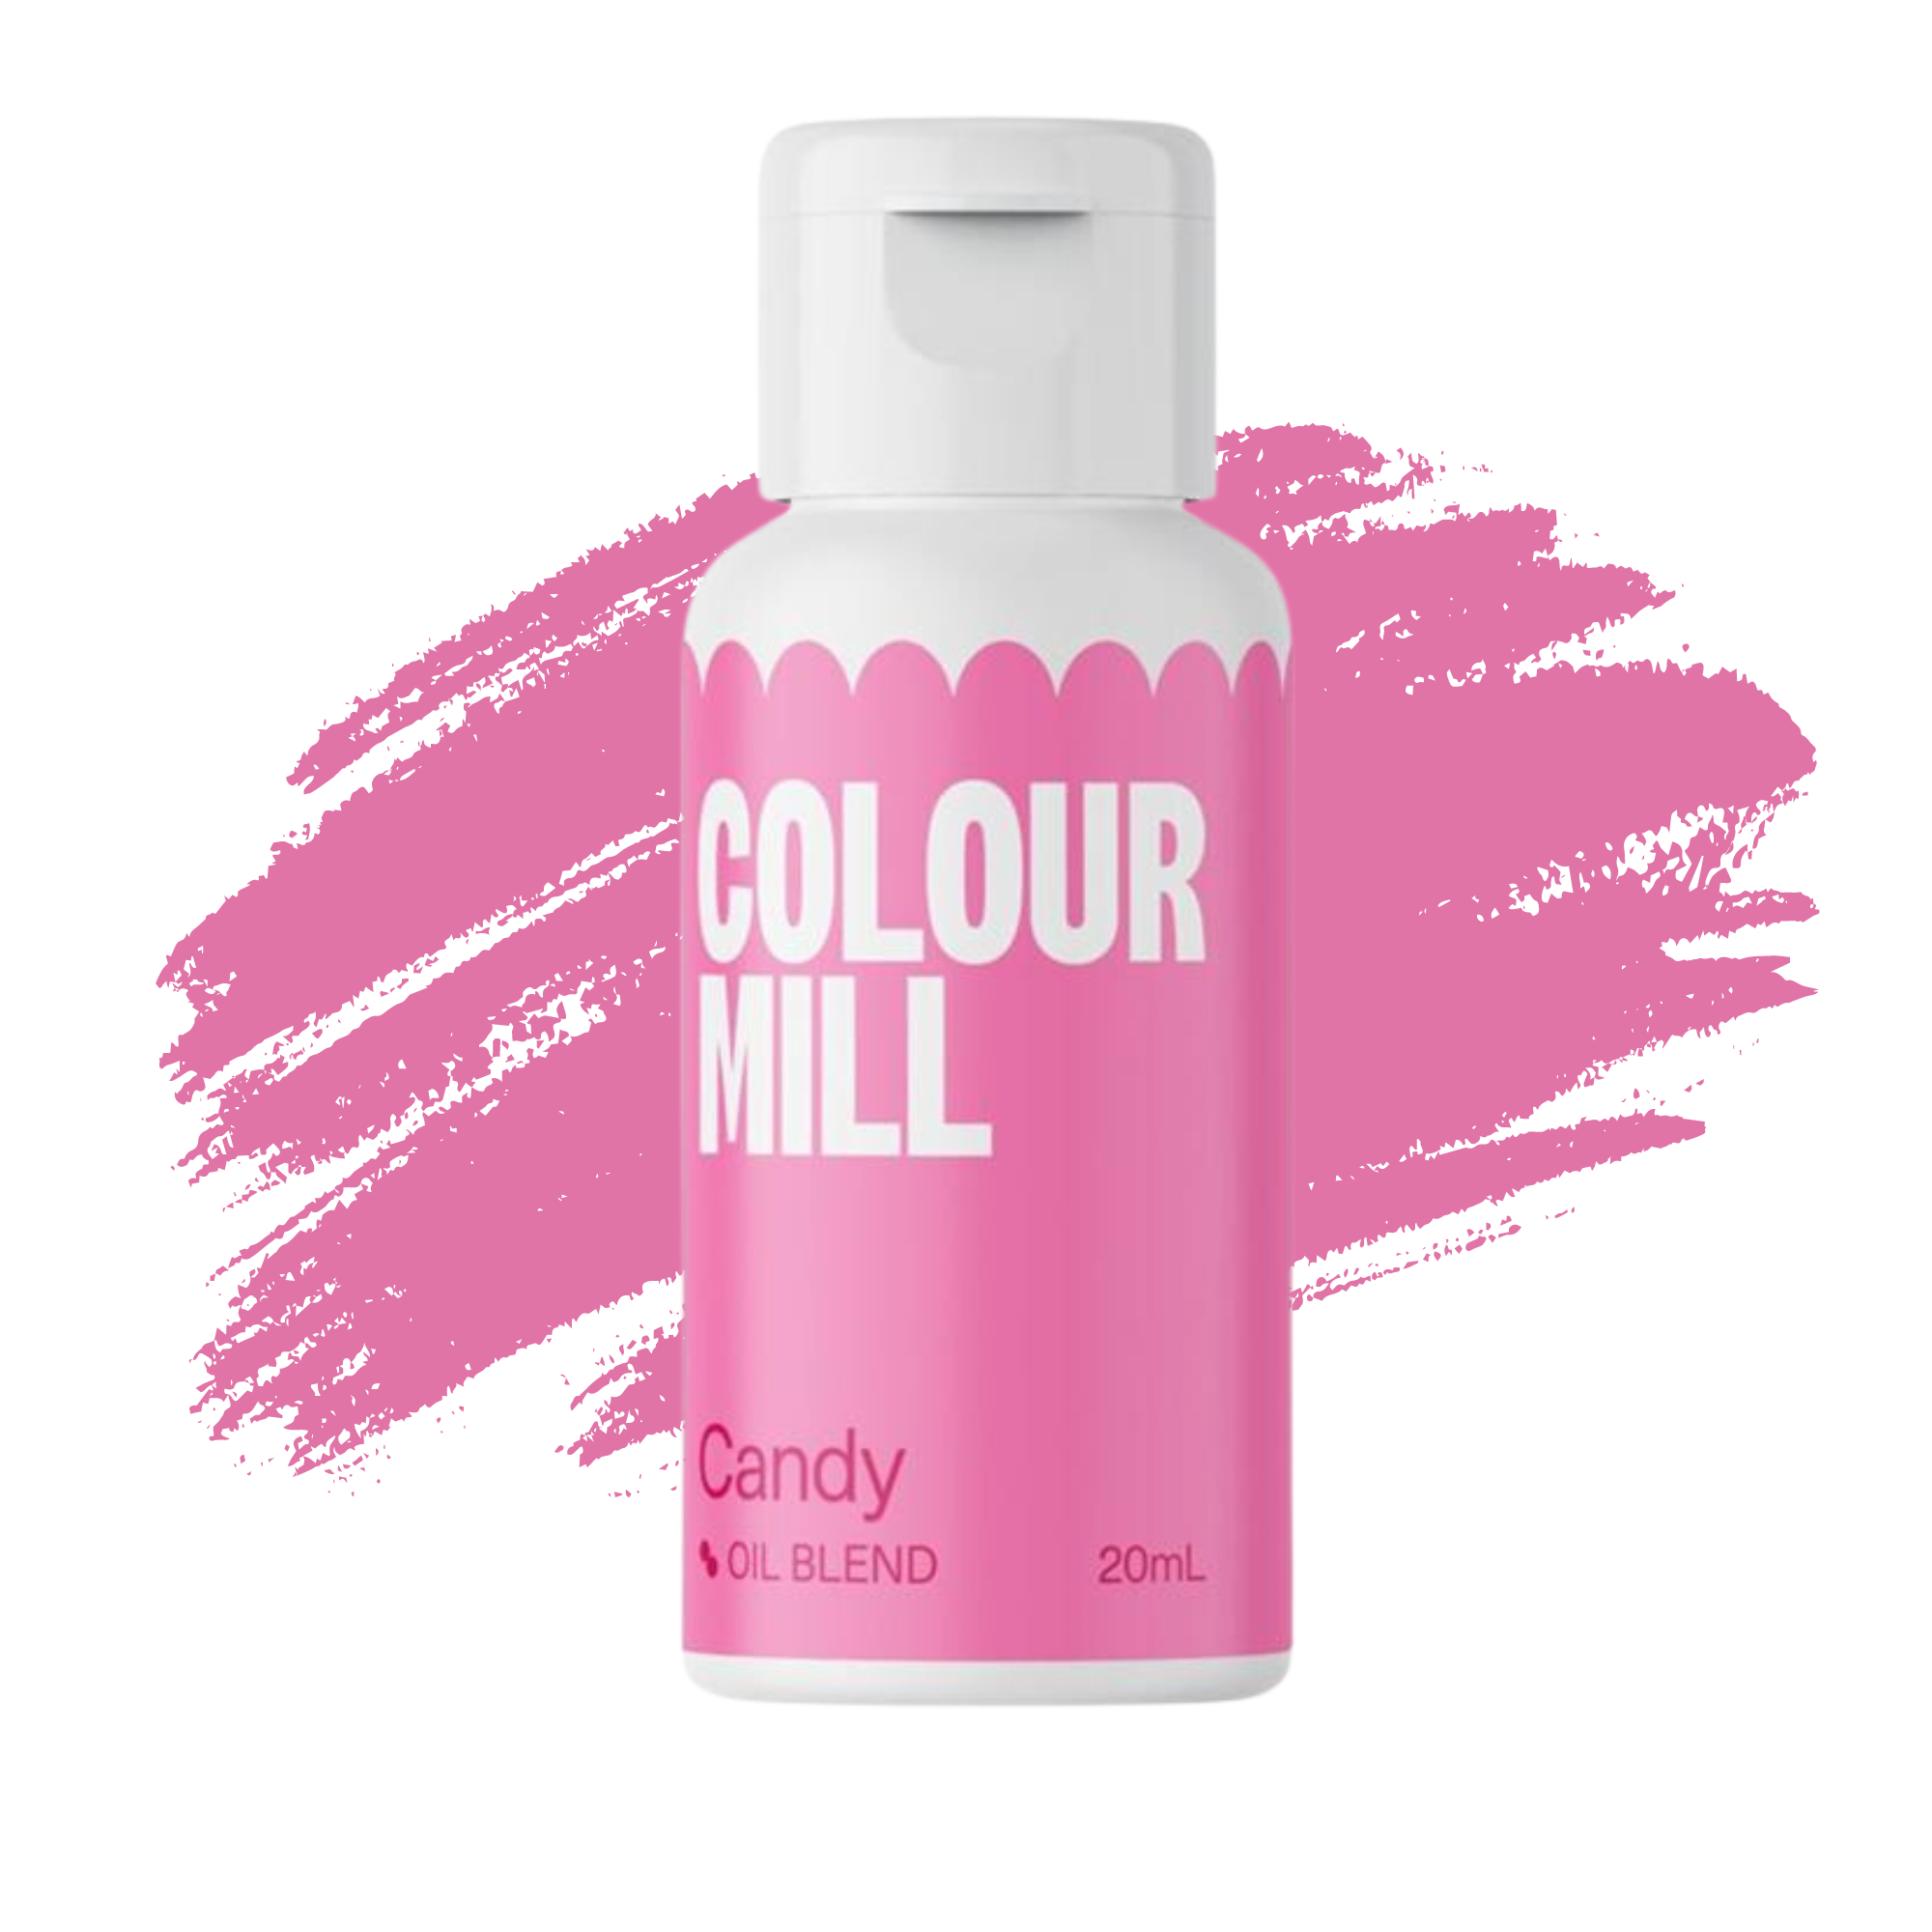 Colour Mill Candy Pink Food Colouring (Oil Based), Oil Based Food Colouring, Candy Pink Food Colouring, Colour Mill Candy Pink, Pink Food Colouring